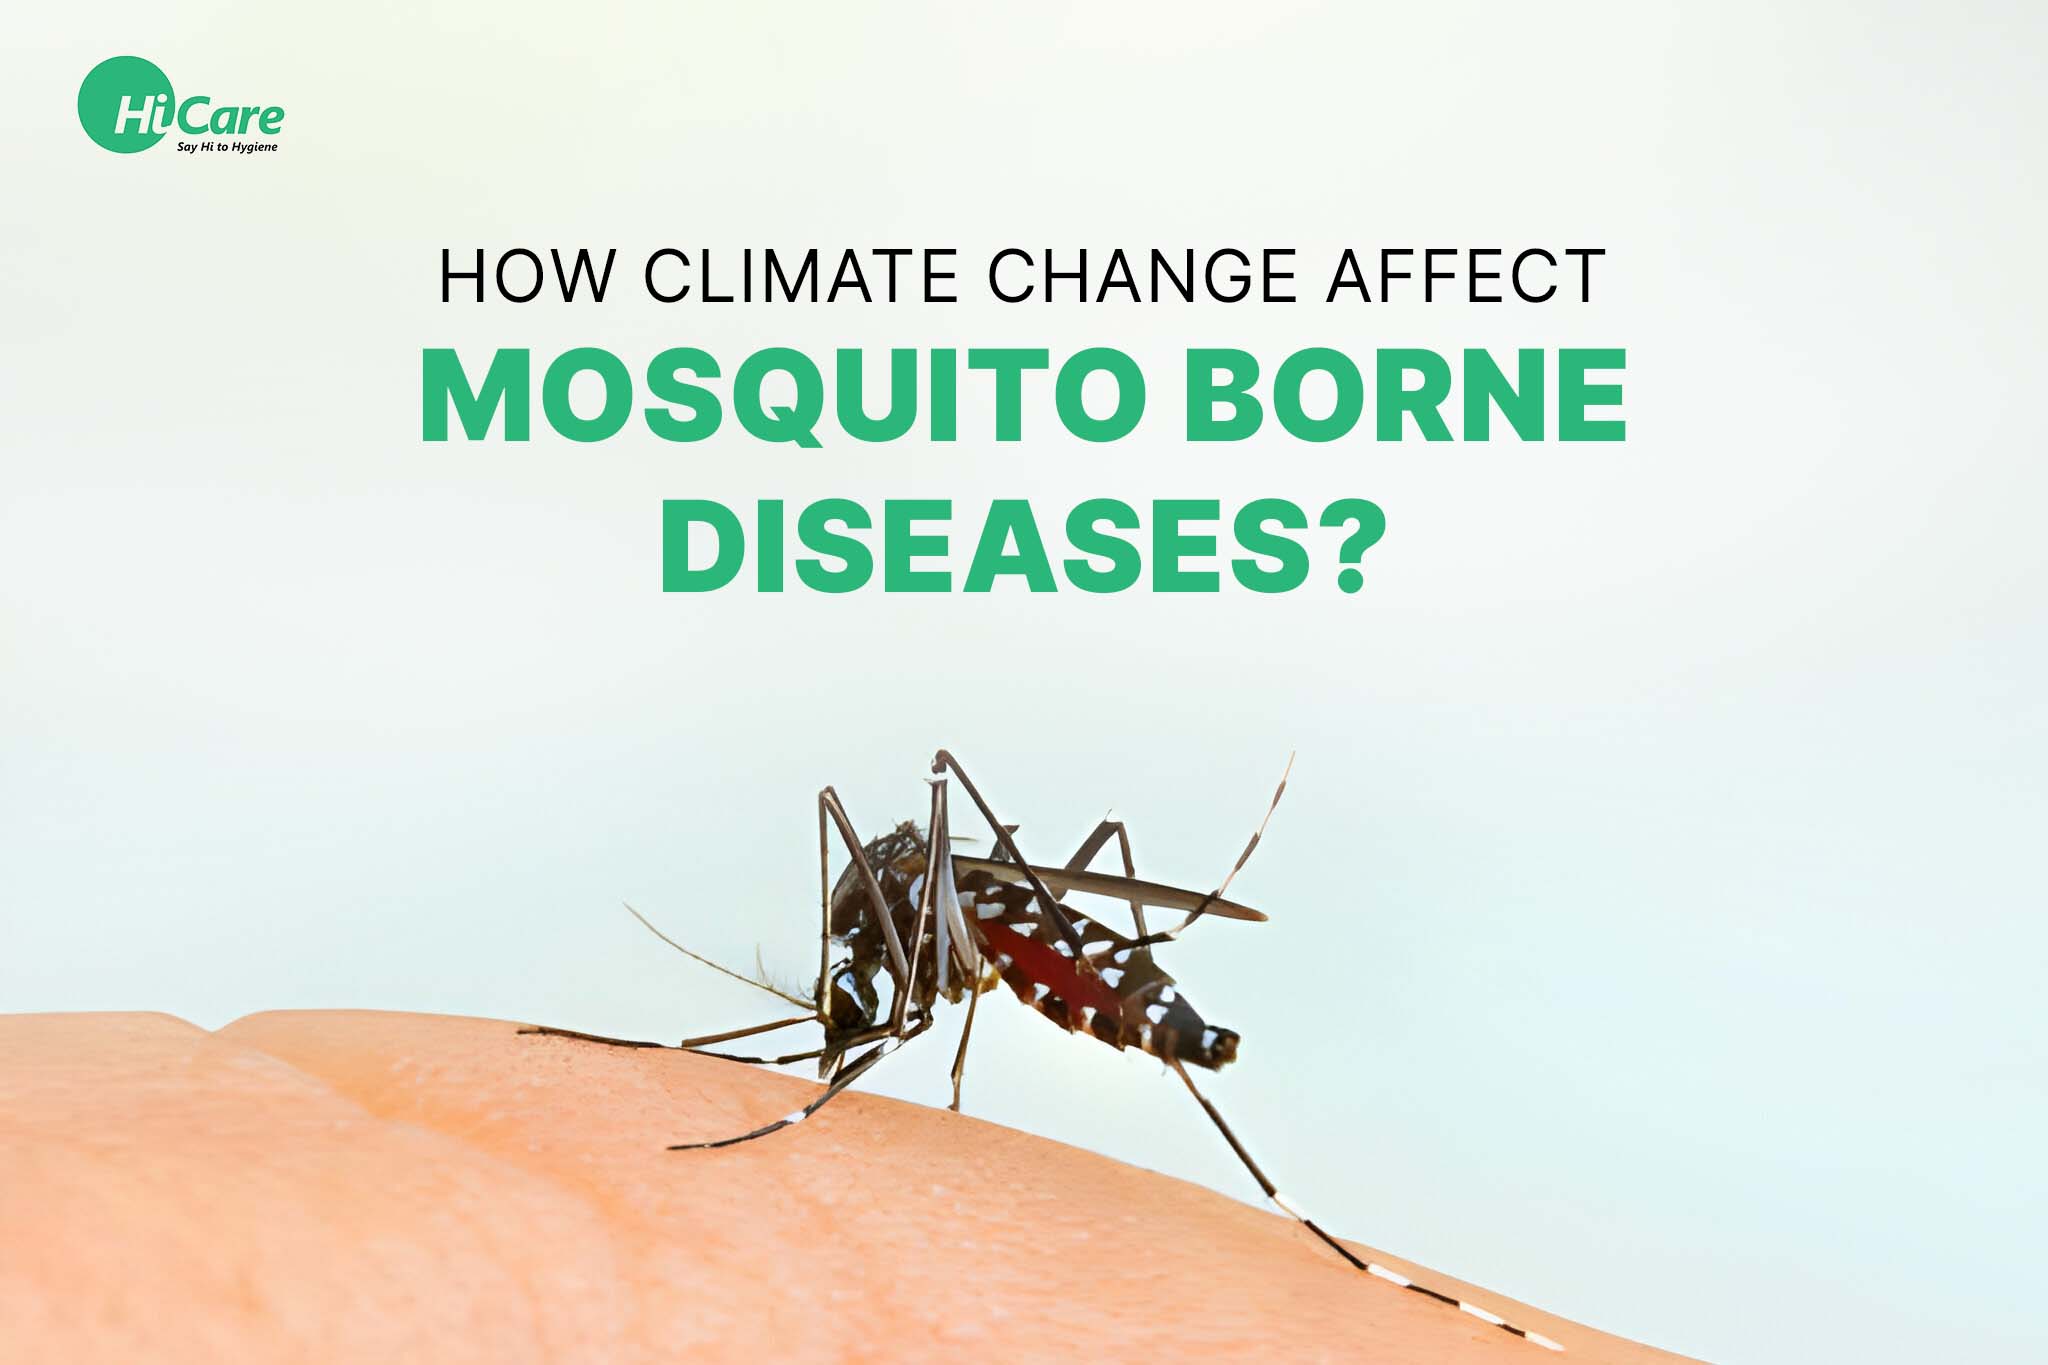 How Climate Change Affect Mosquito-Borne Diseases?